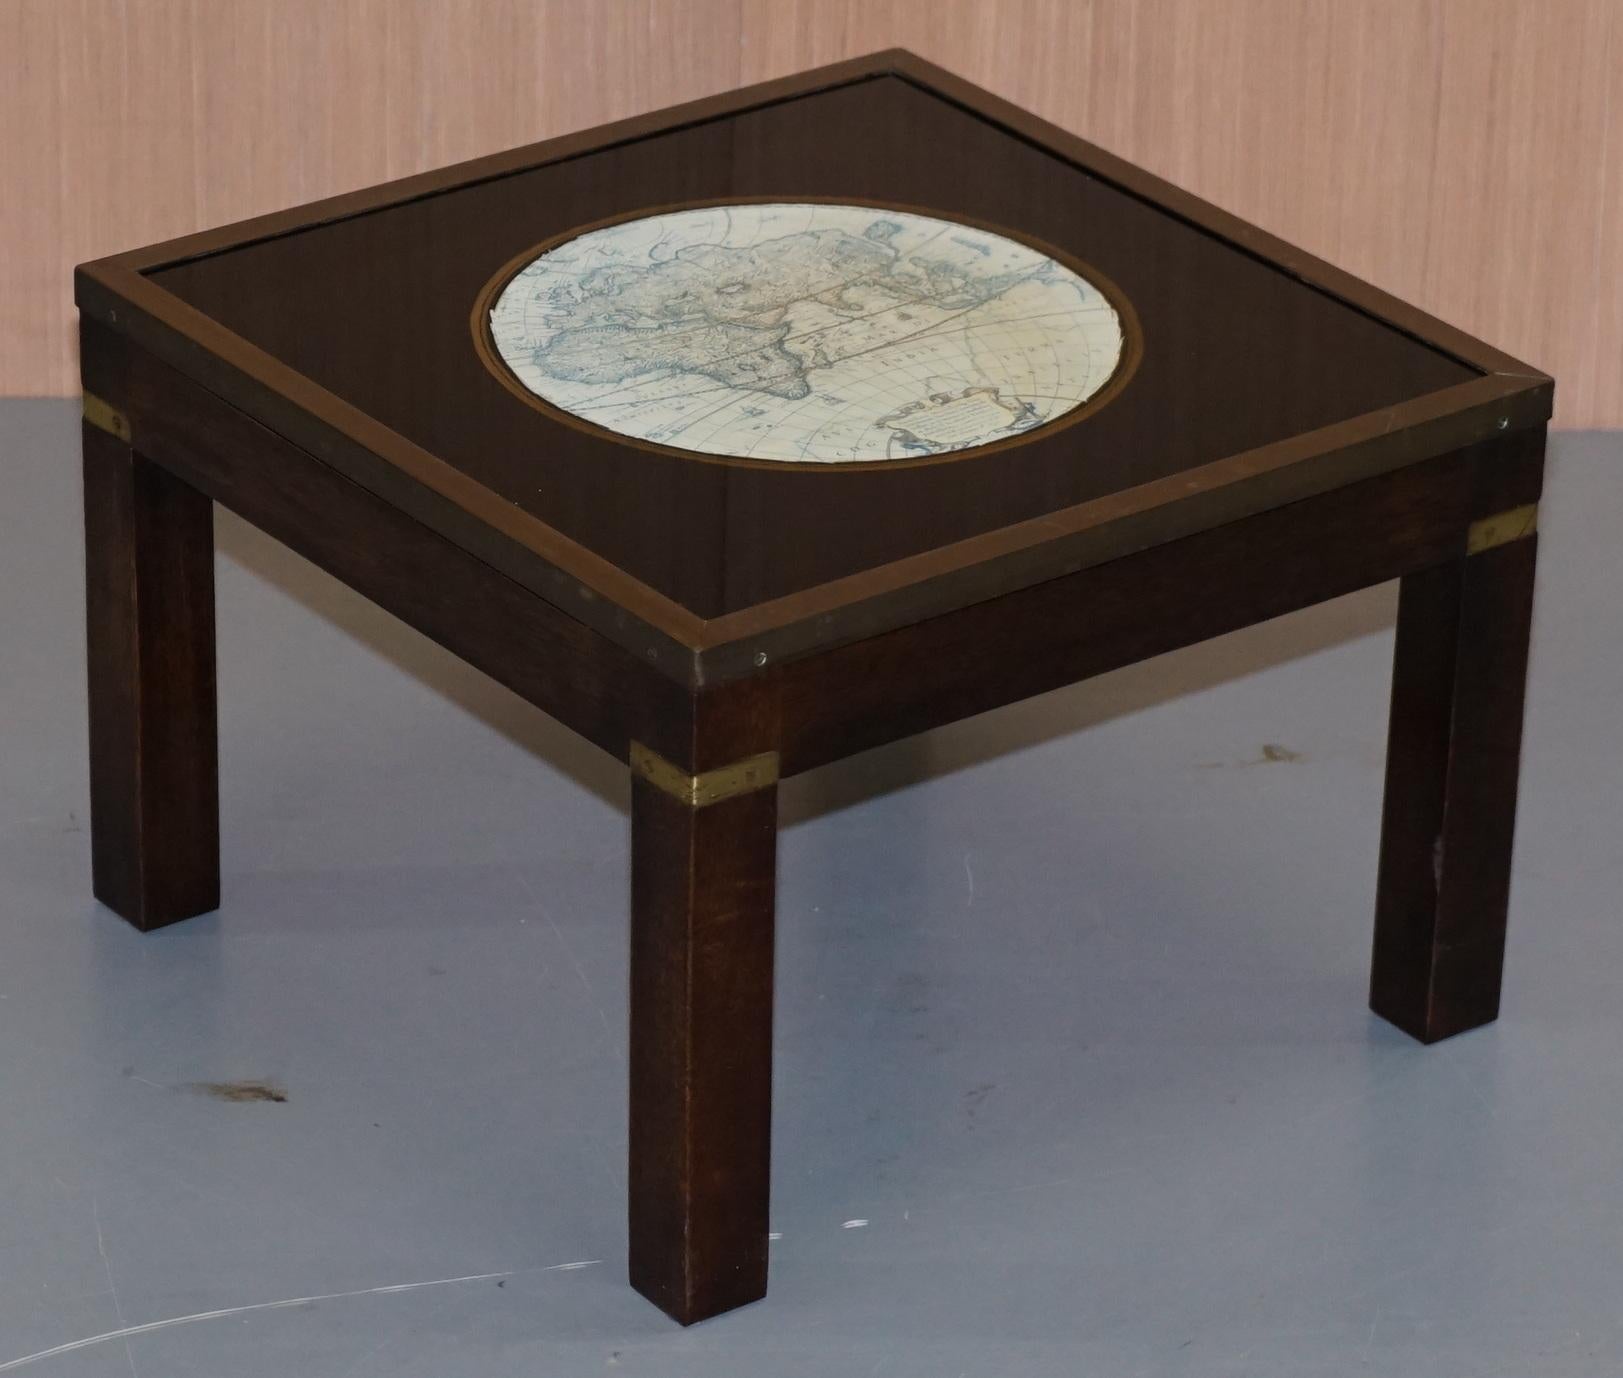 Stunning Coffee and Side Table Nest of Tables Military Campaign with World Maps For Sale 7